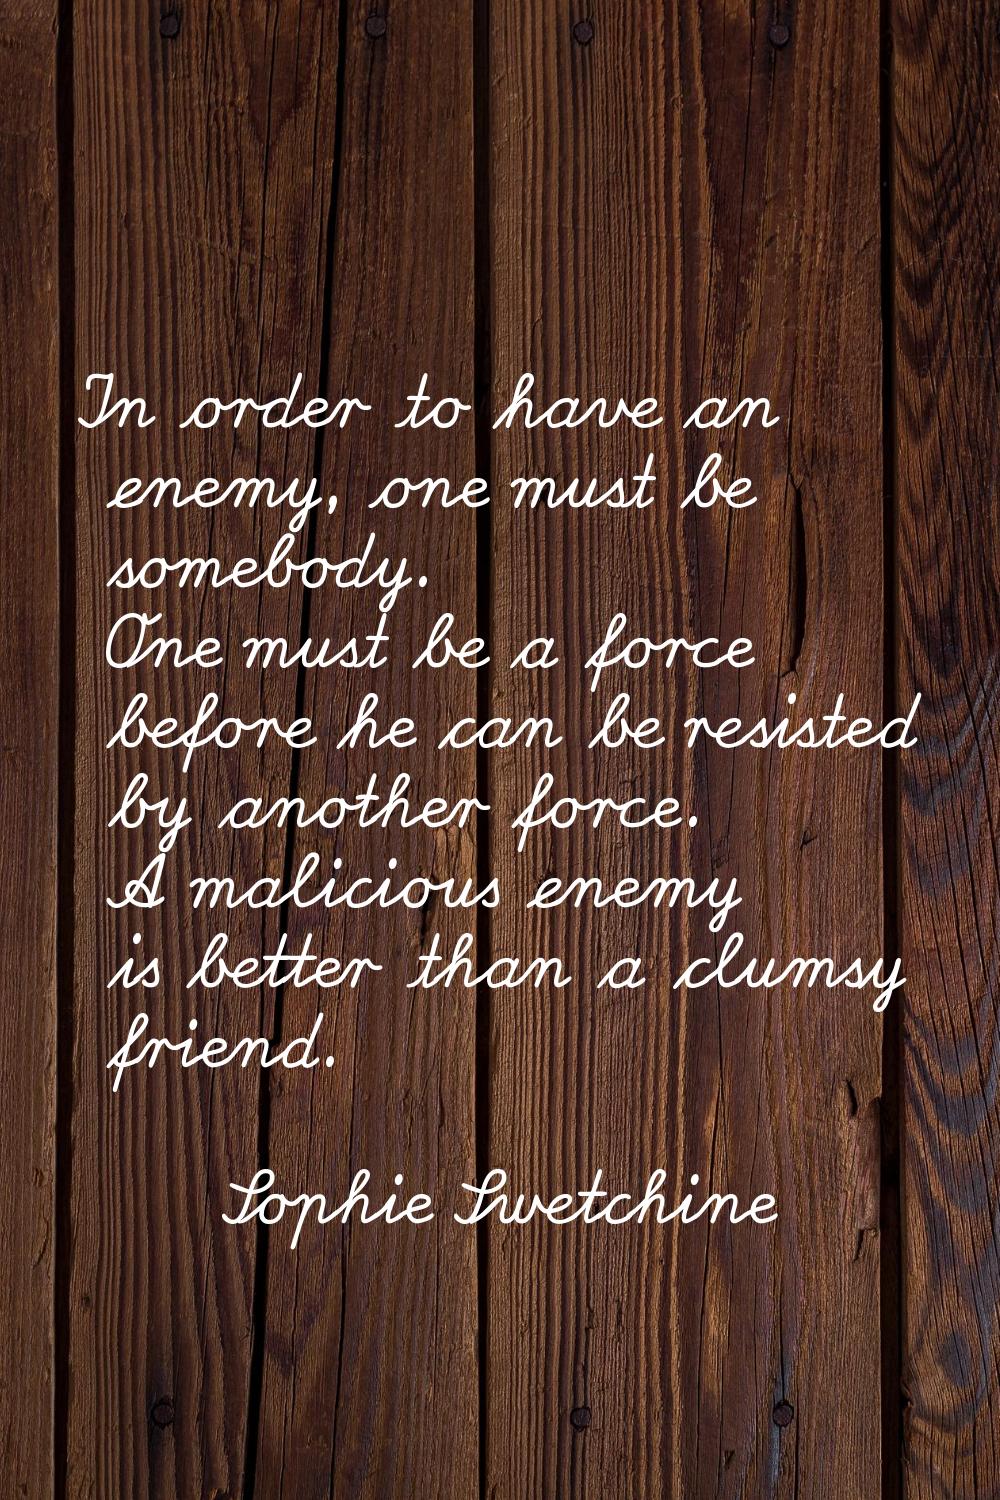 In order to have an enemy, one must be somebody. One must be a force before he can be resisted by a